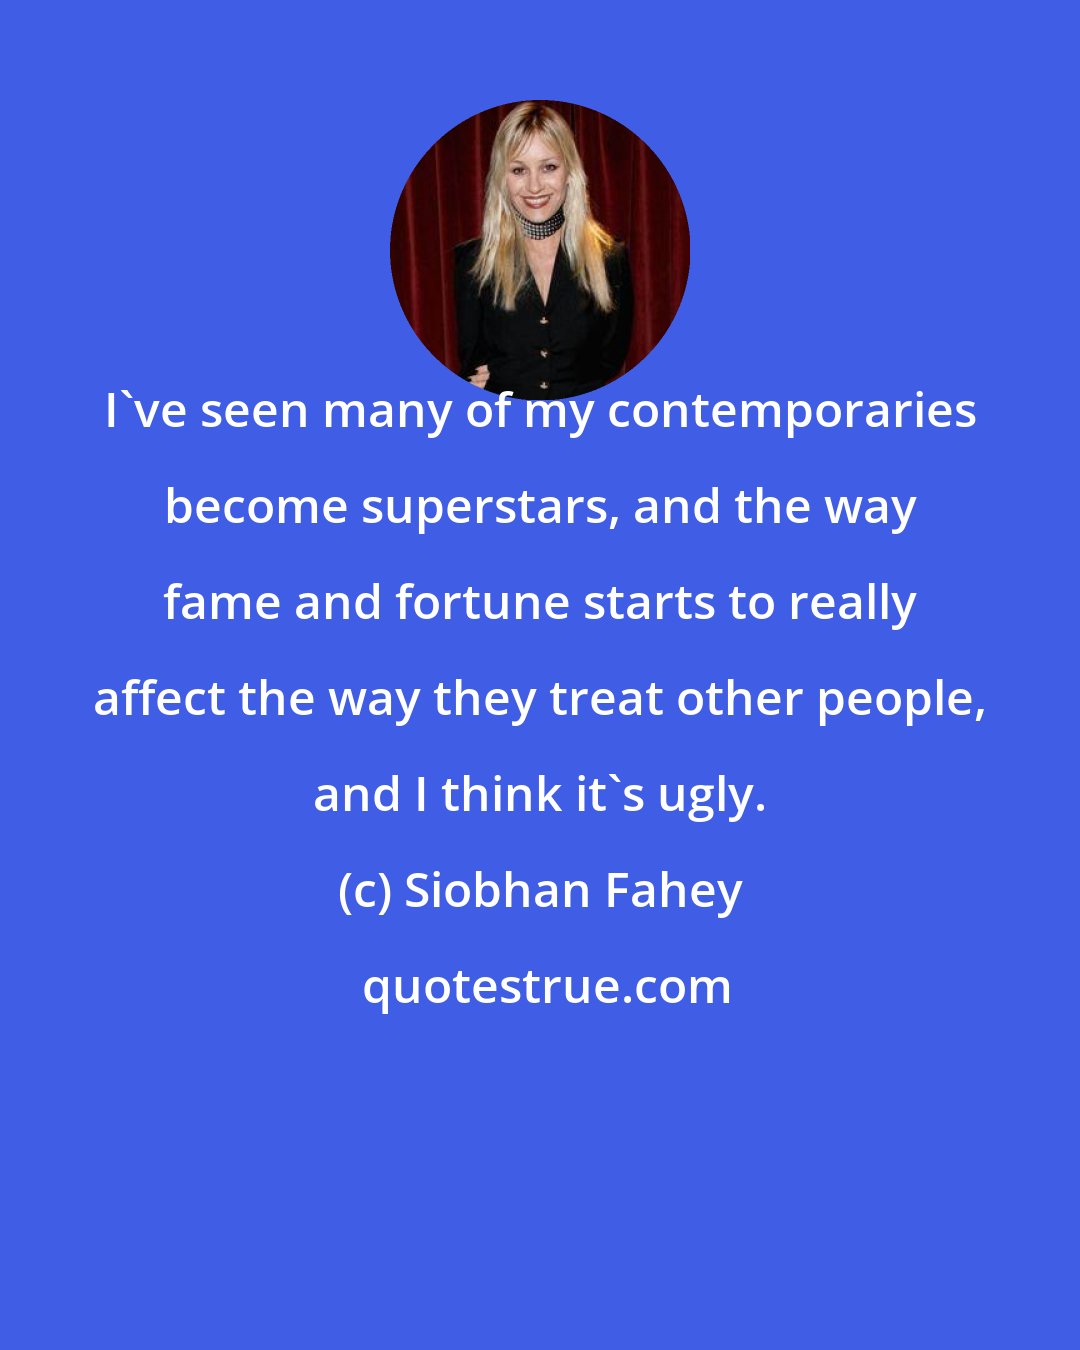 Siobhan Fahey: I've seen many of my contemporaries become superstars, and the way fame and fortune starts to really affect the way they treat other people, and I think it's ugly.